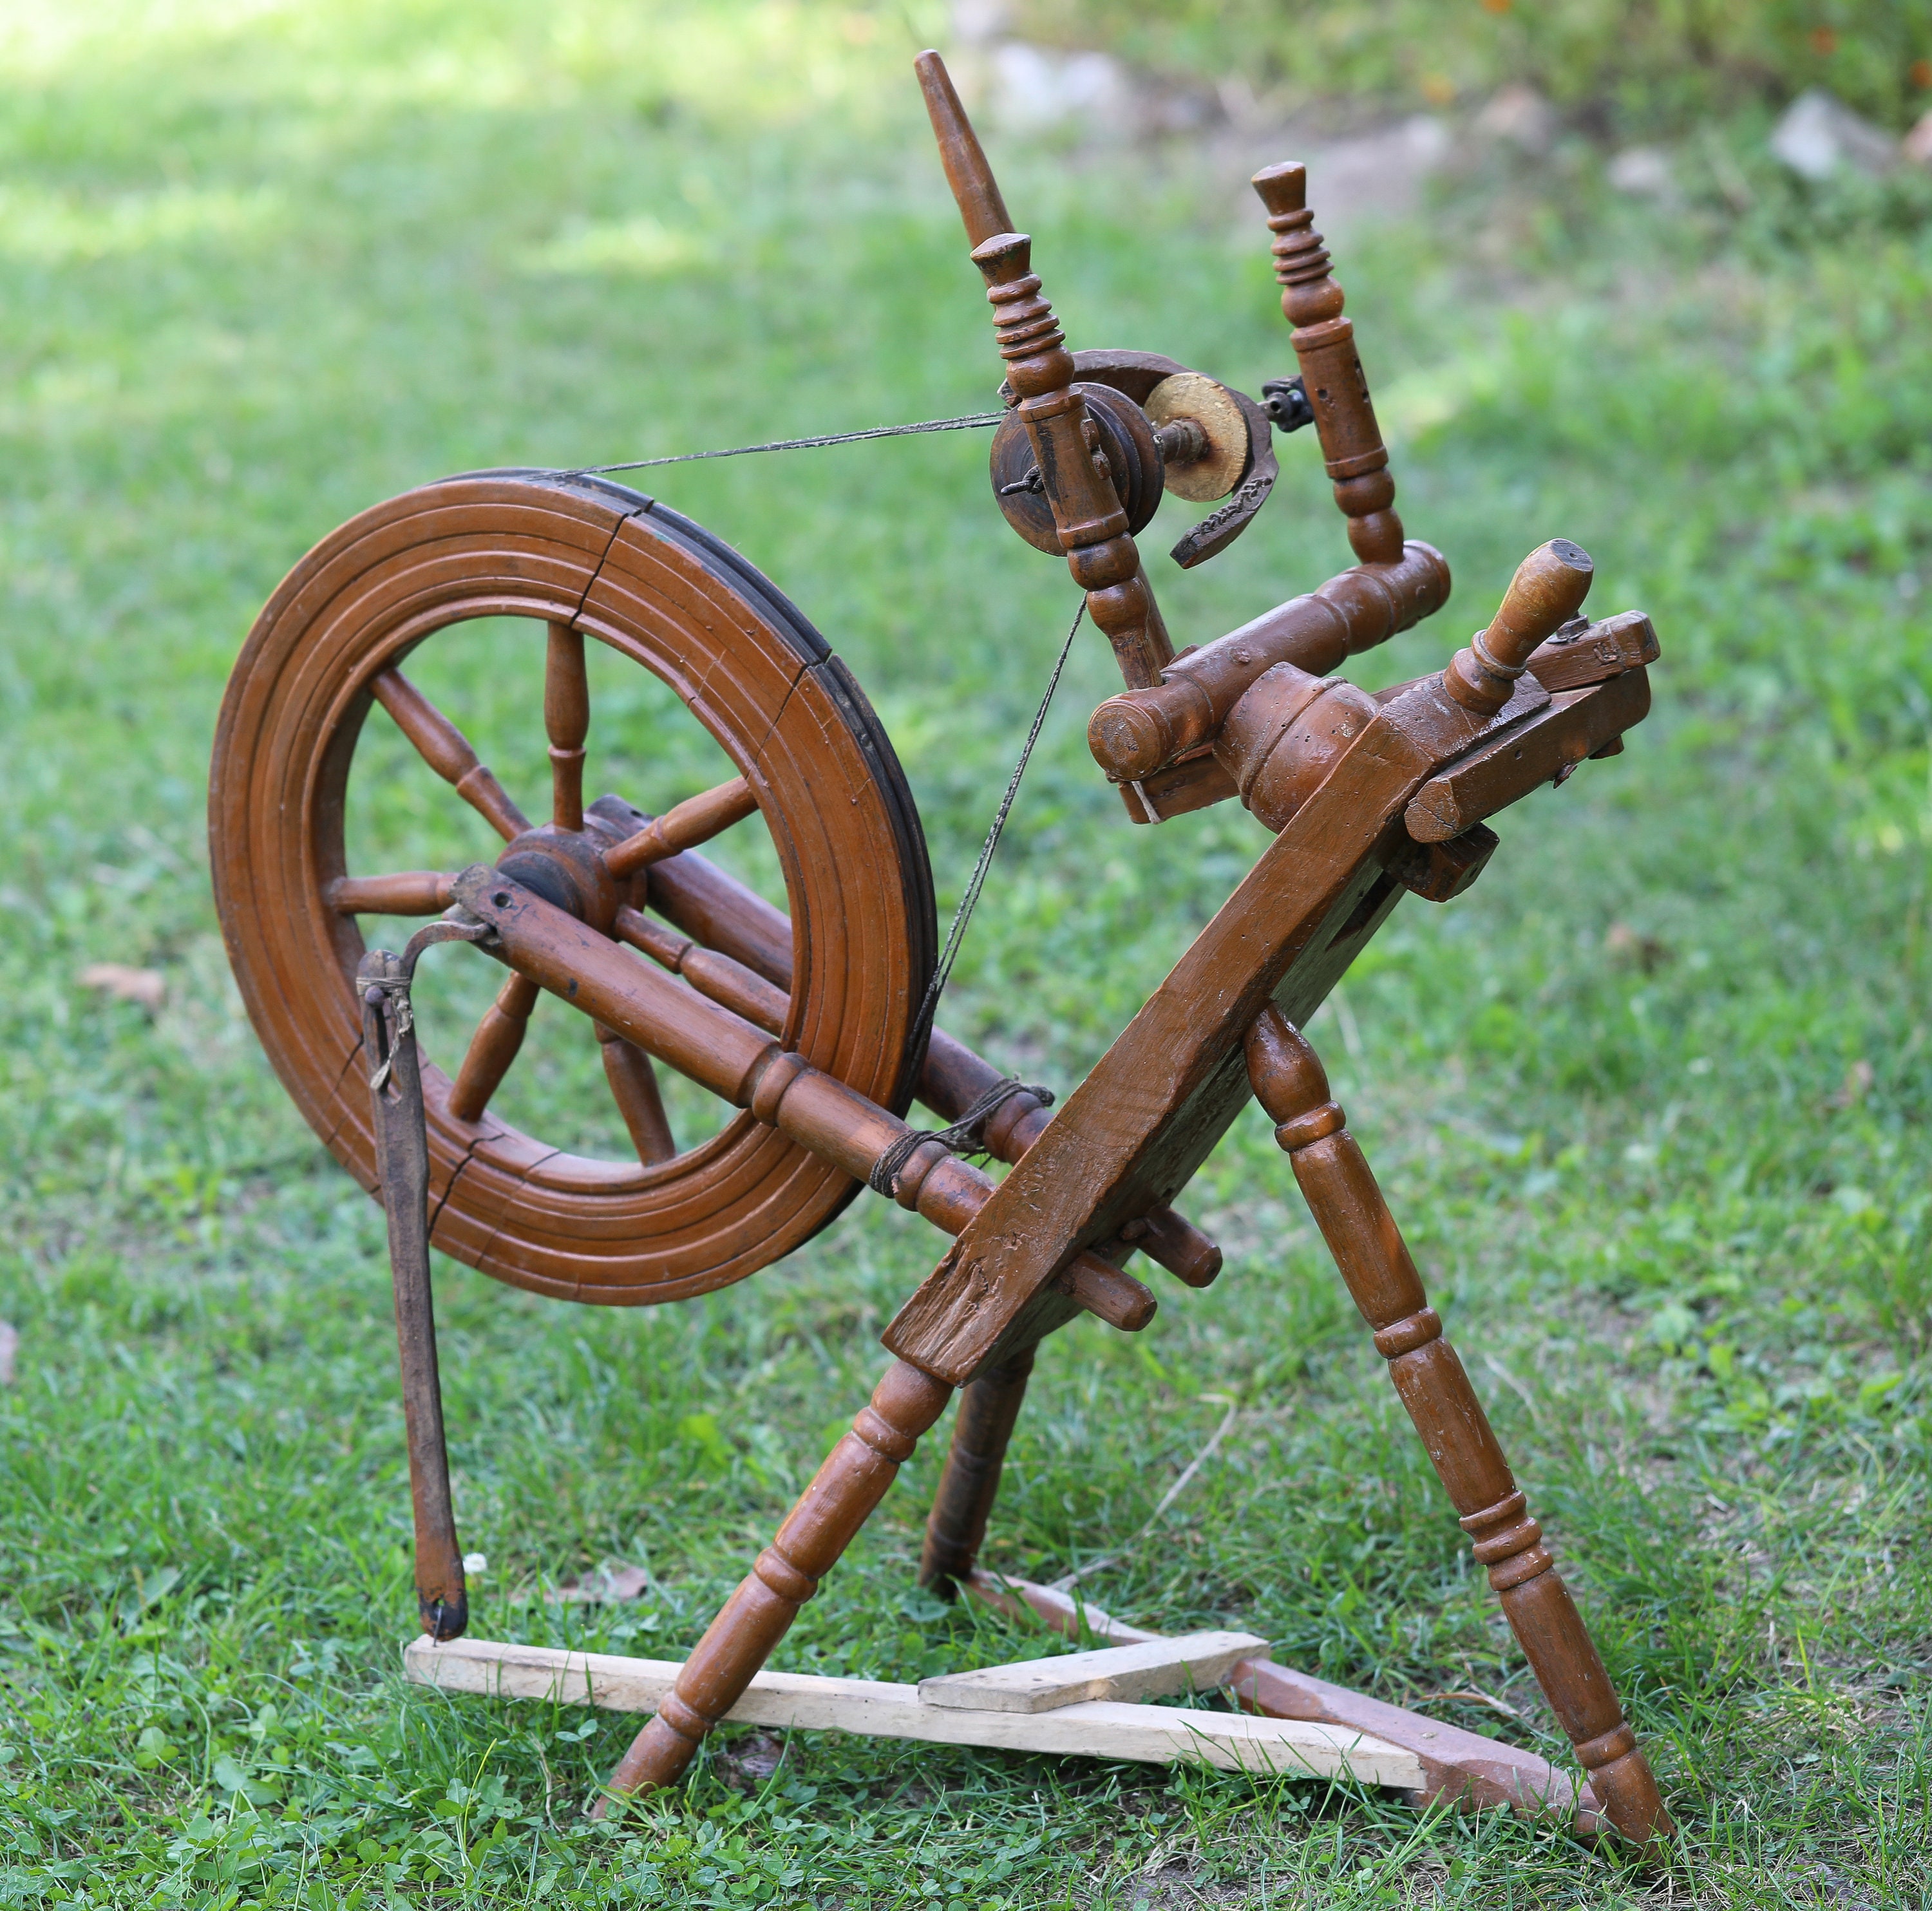 Handcrafted Wooden Spinning Wheel With 3 Bobbins Fiber Art Tool